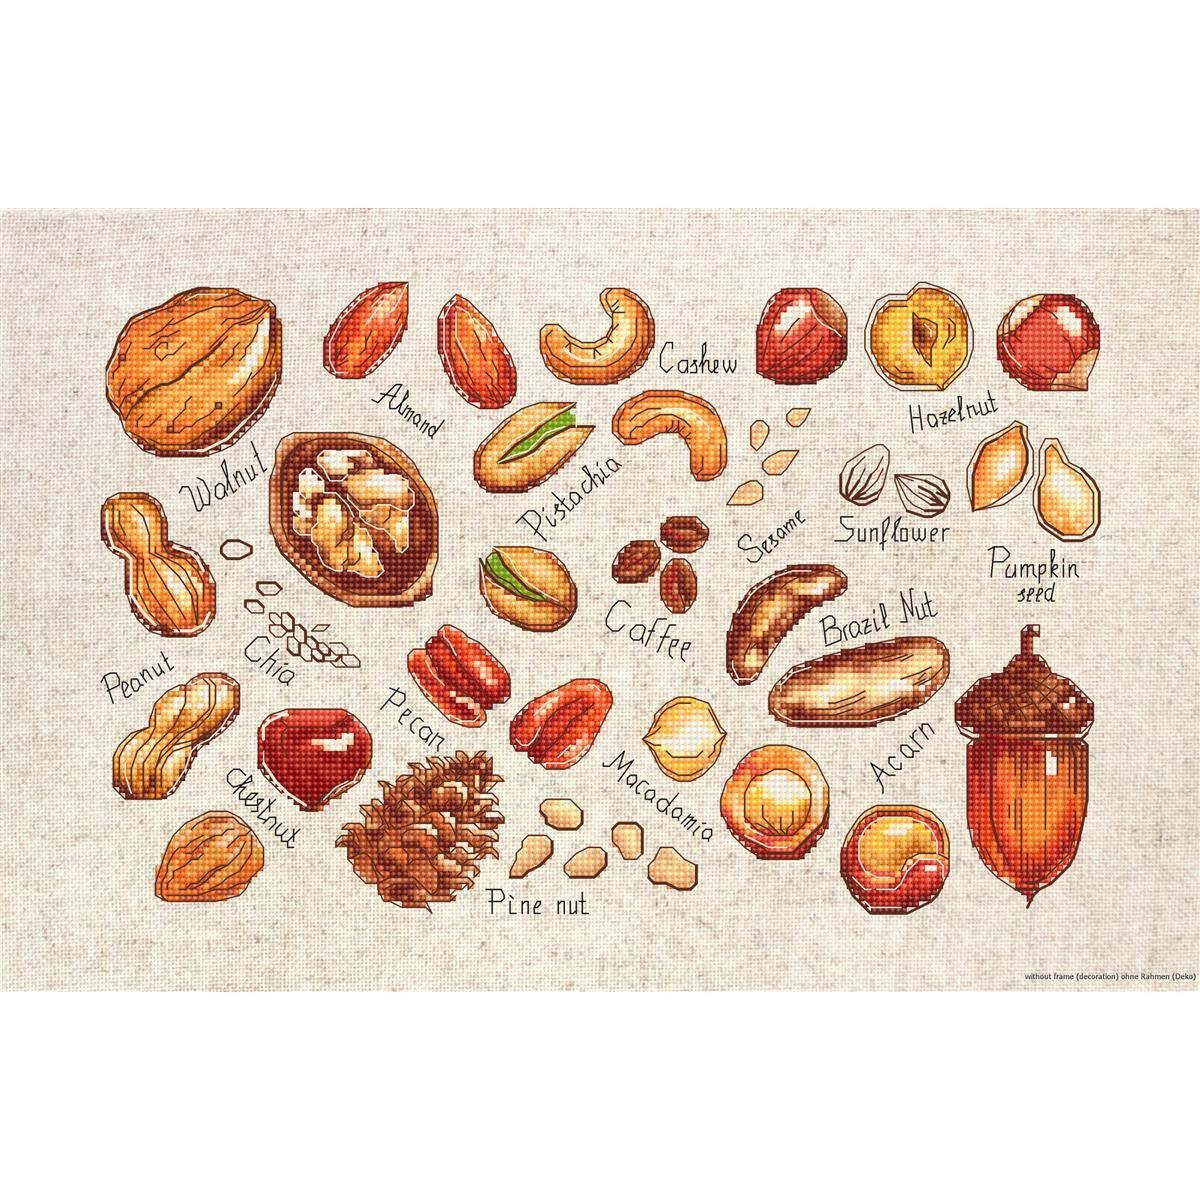 Illustrated symbols of various nuts and seeds are...